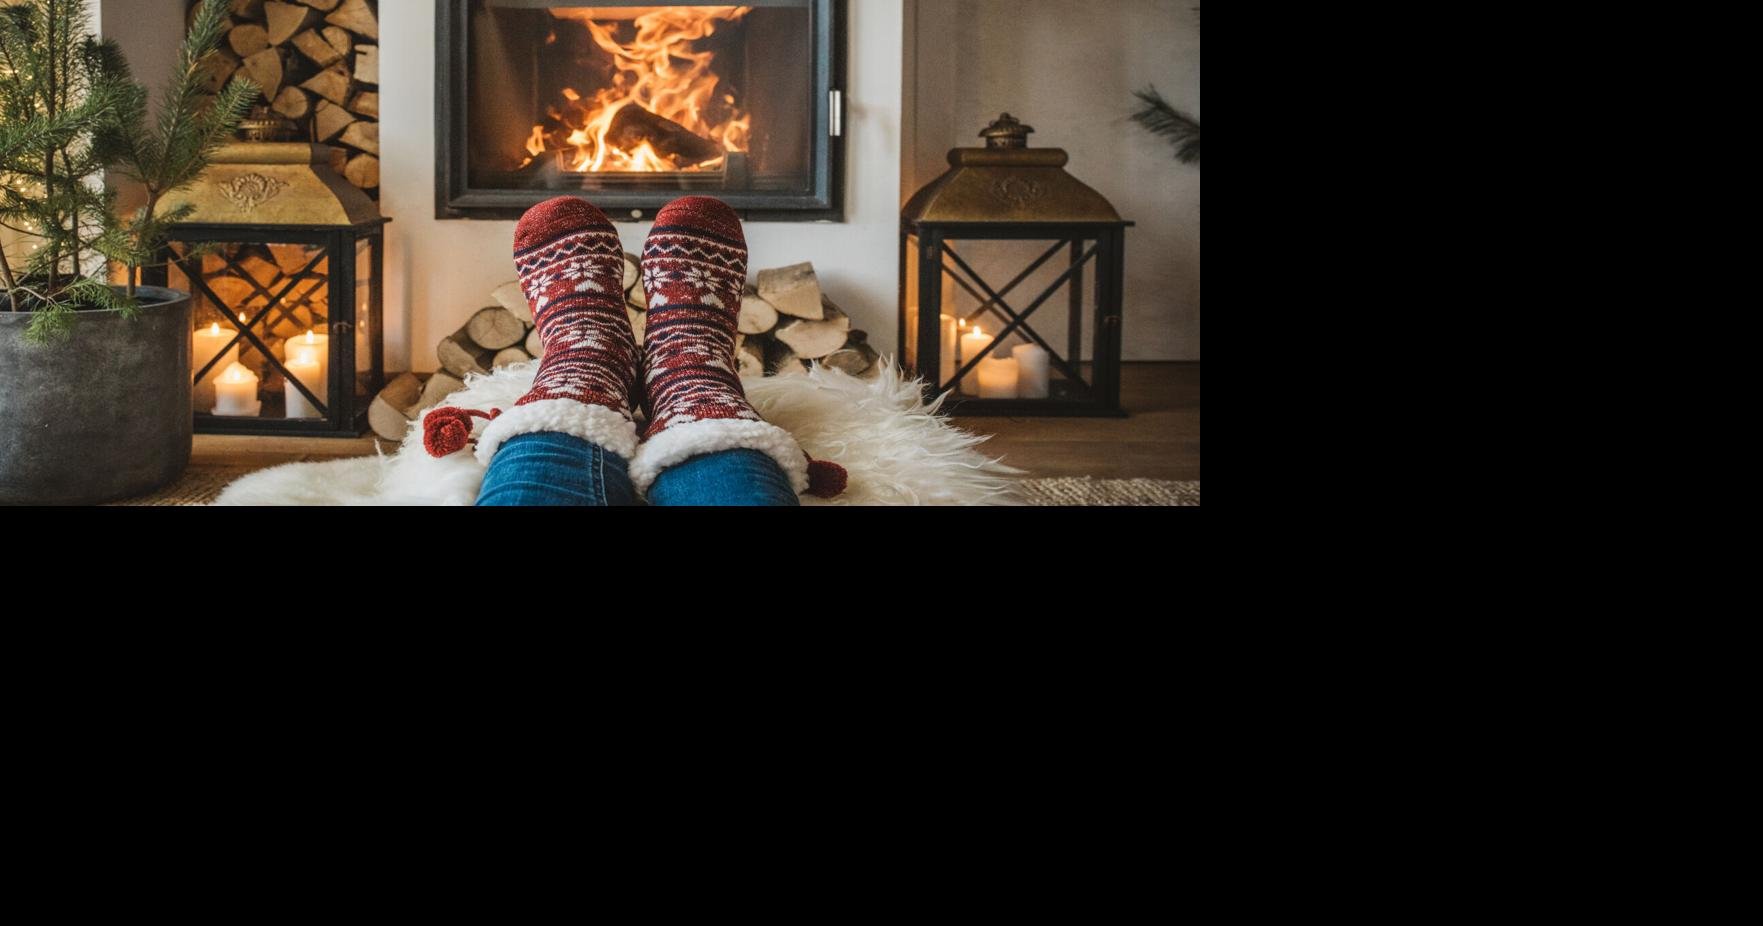 5 Ways to Maximize Your Cozy Home for Maximum Comfort - U Cant Wear That!